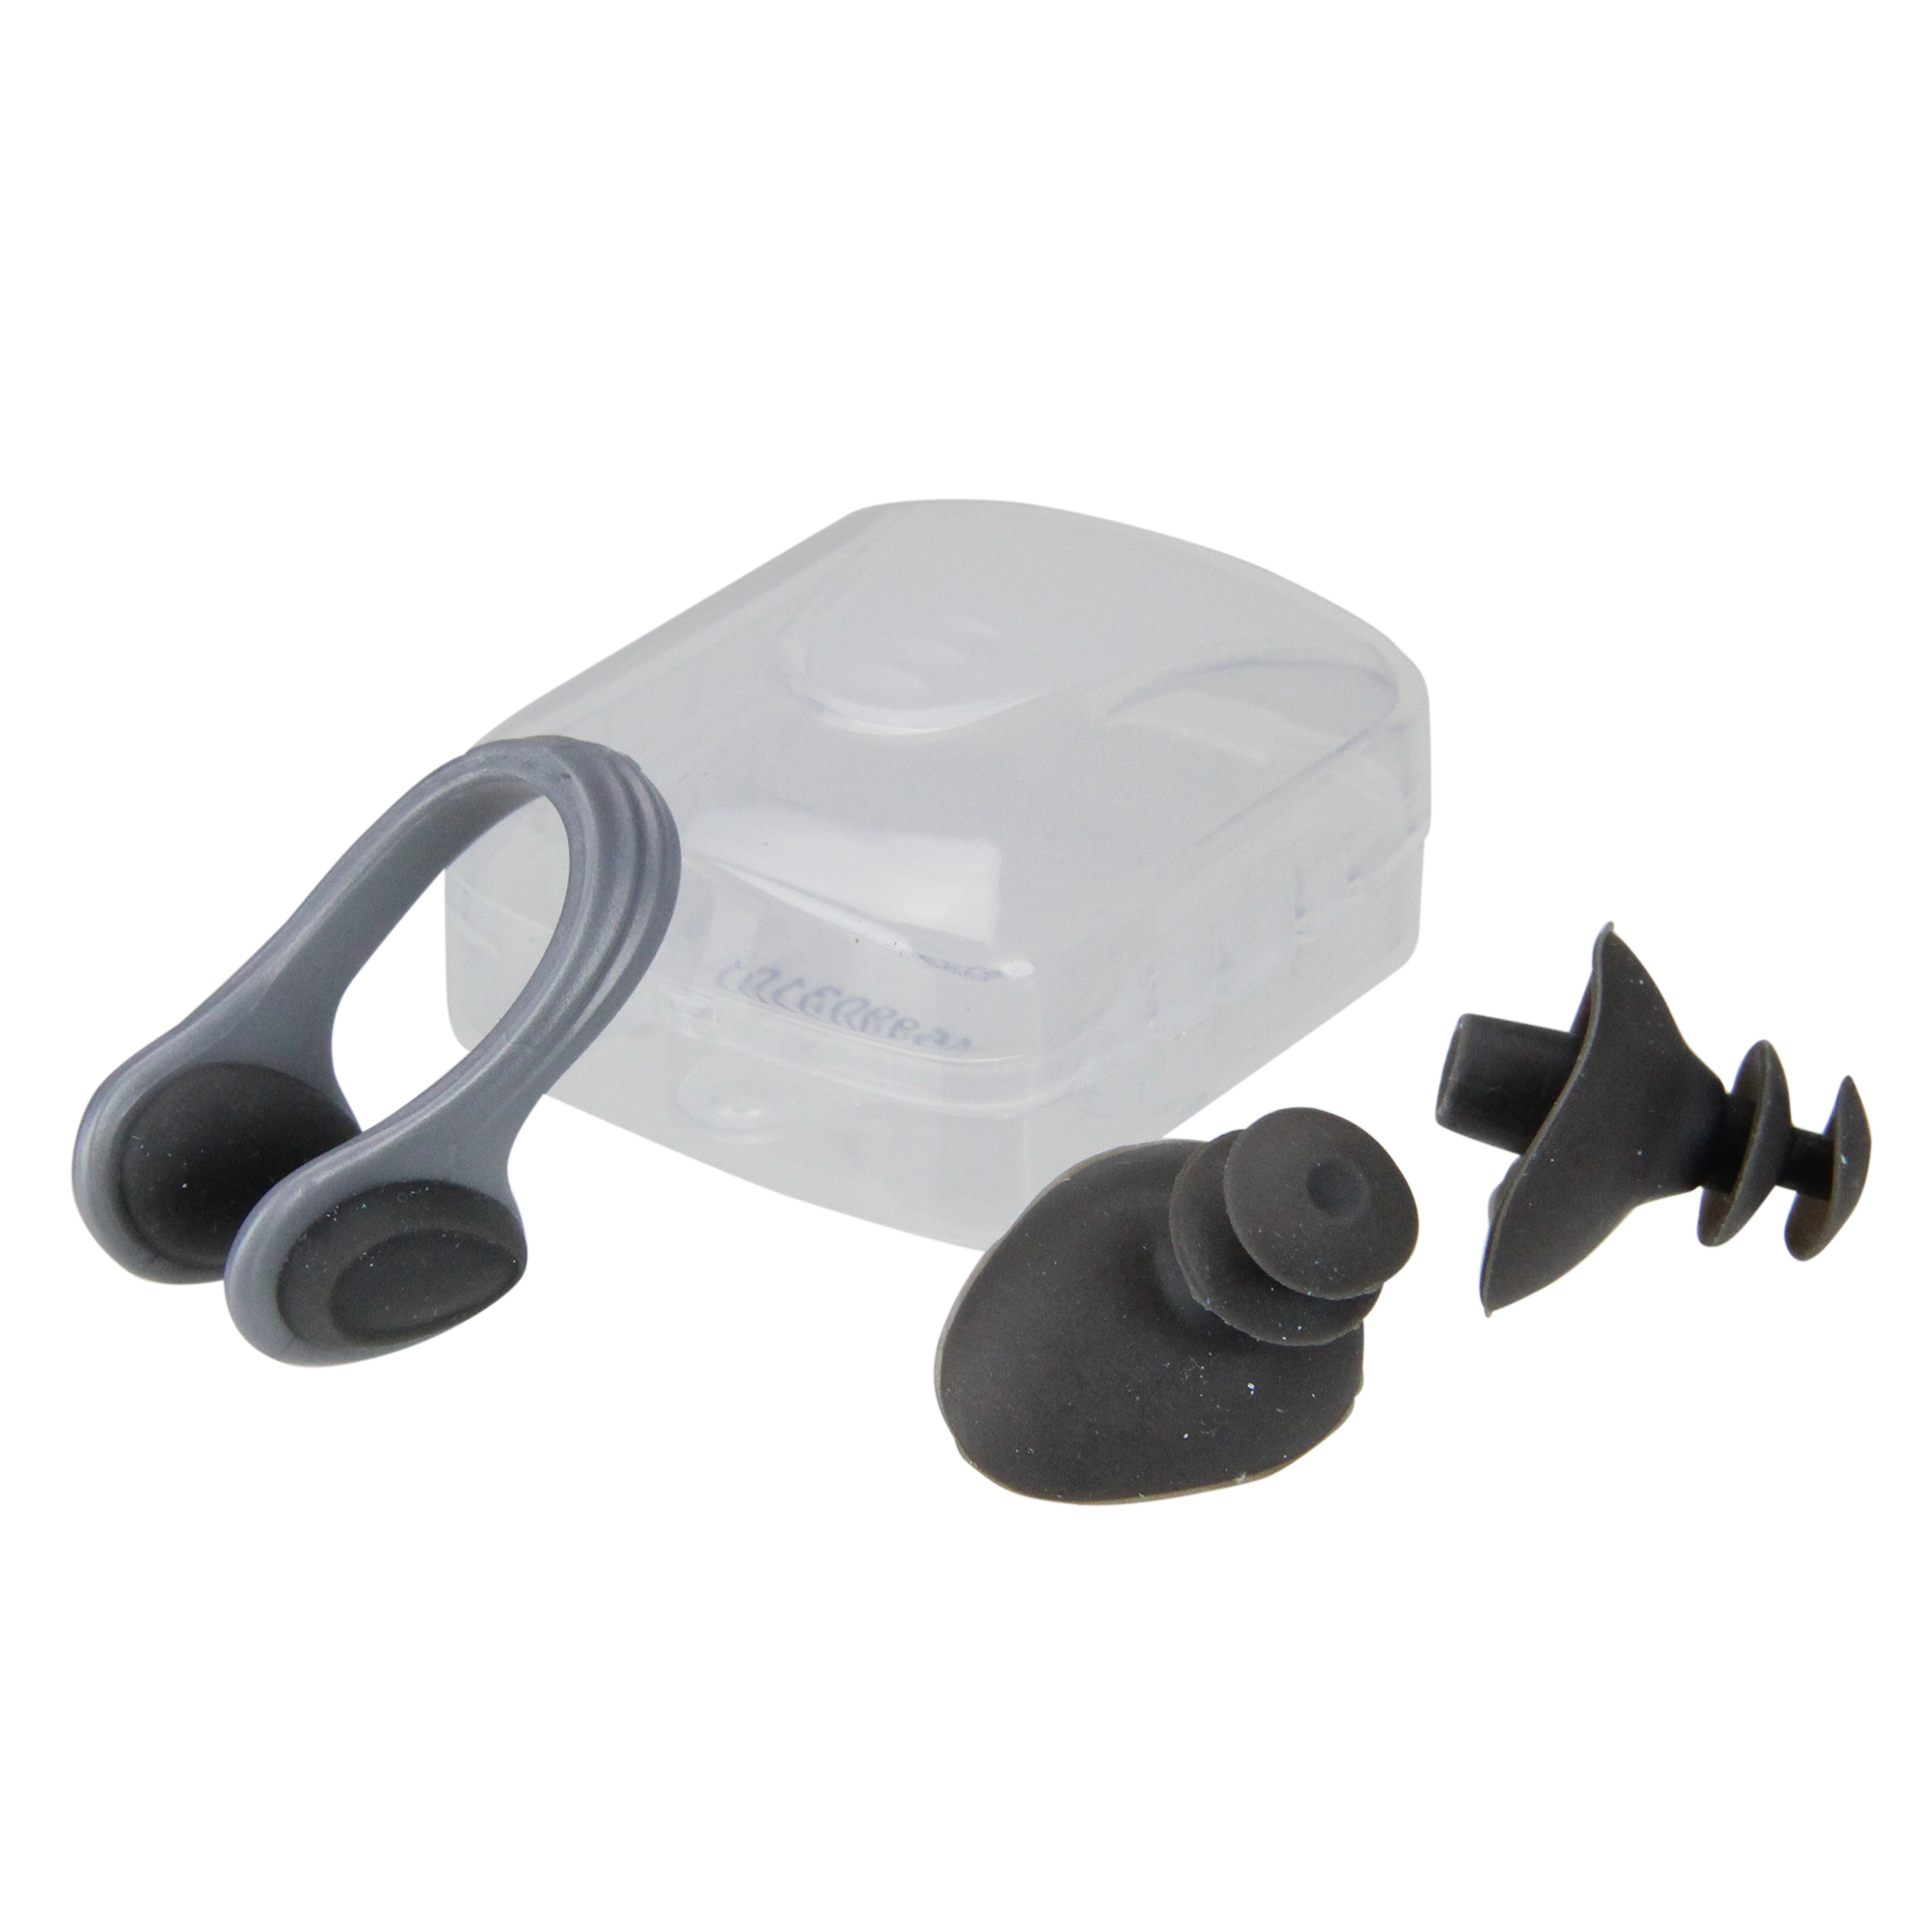 Swim Central 2" Gray and Black Nose Clip and Ear Plug Swimming Pool Accessory Set with Case